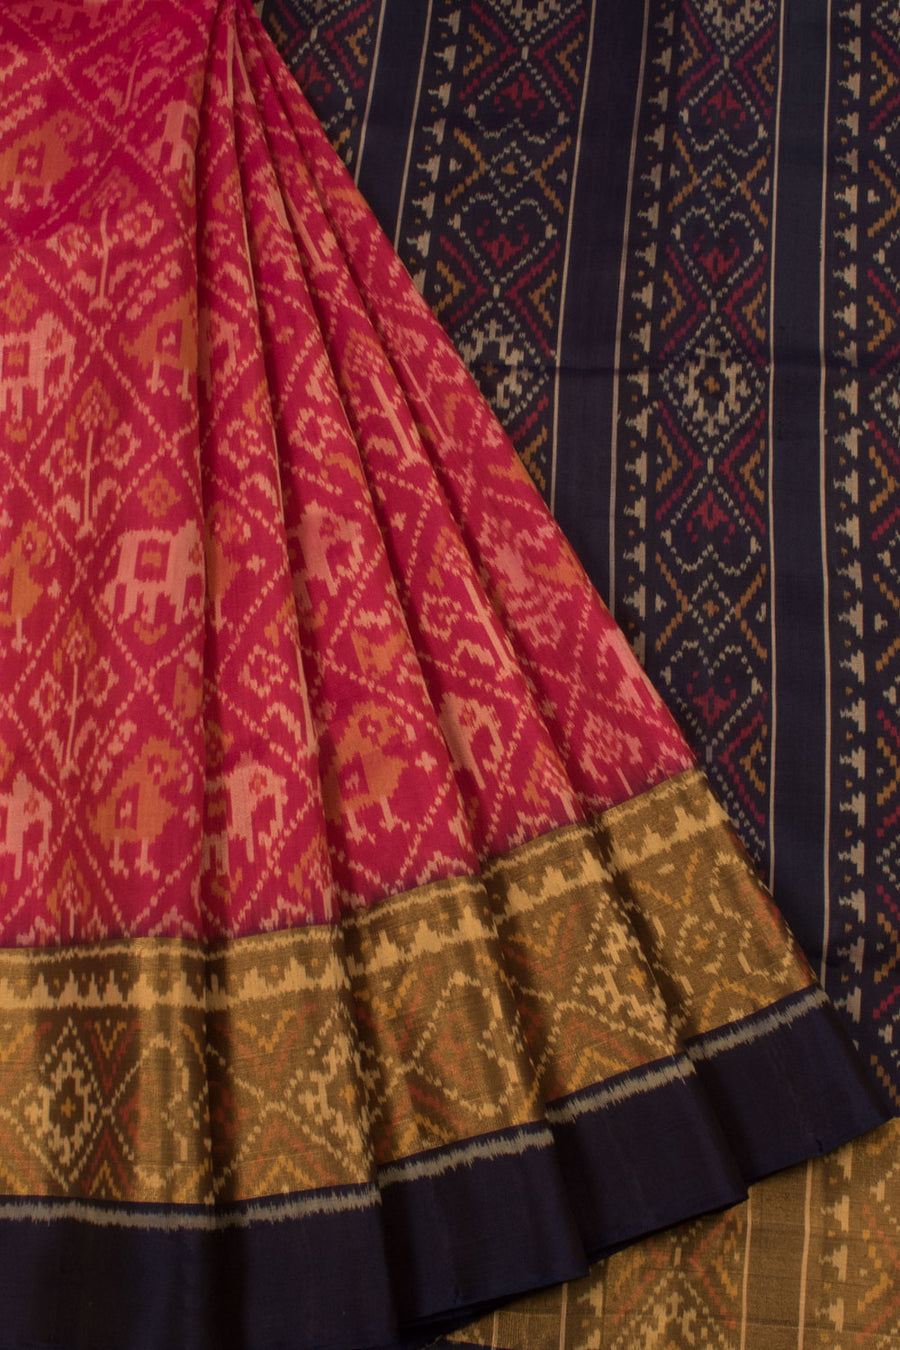 Handloom Patola Ikat Mulberry Silk Saree with Elephant, Parrot Motifs and Tissue Border